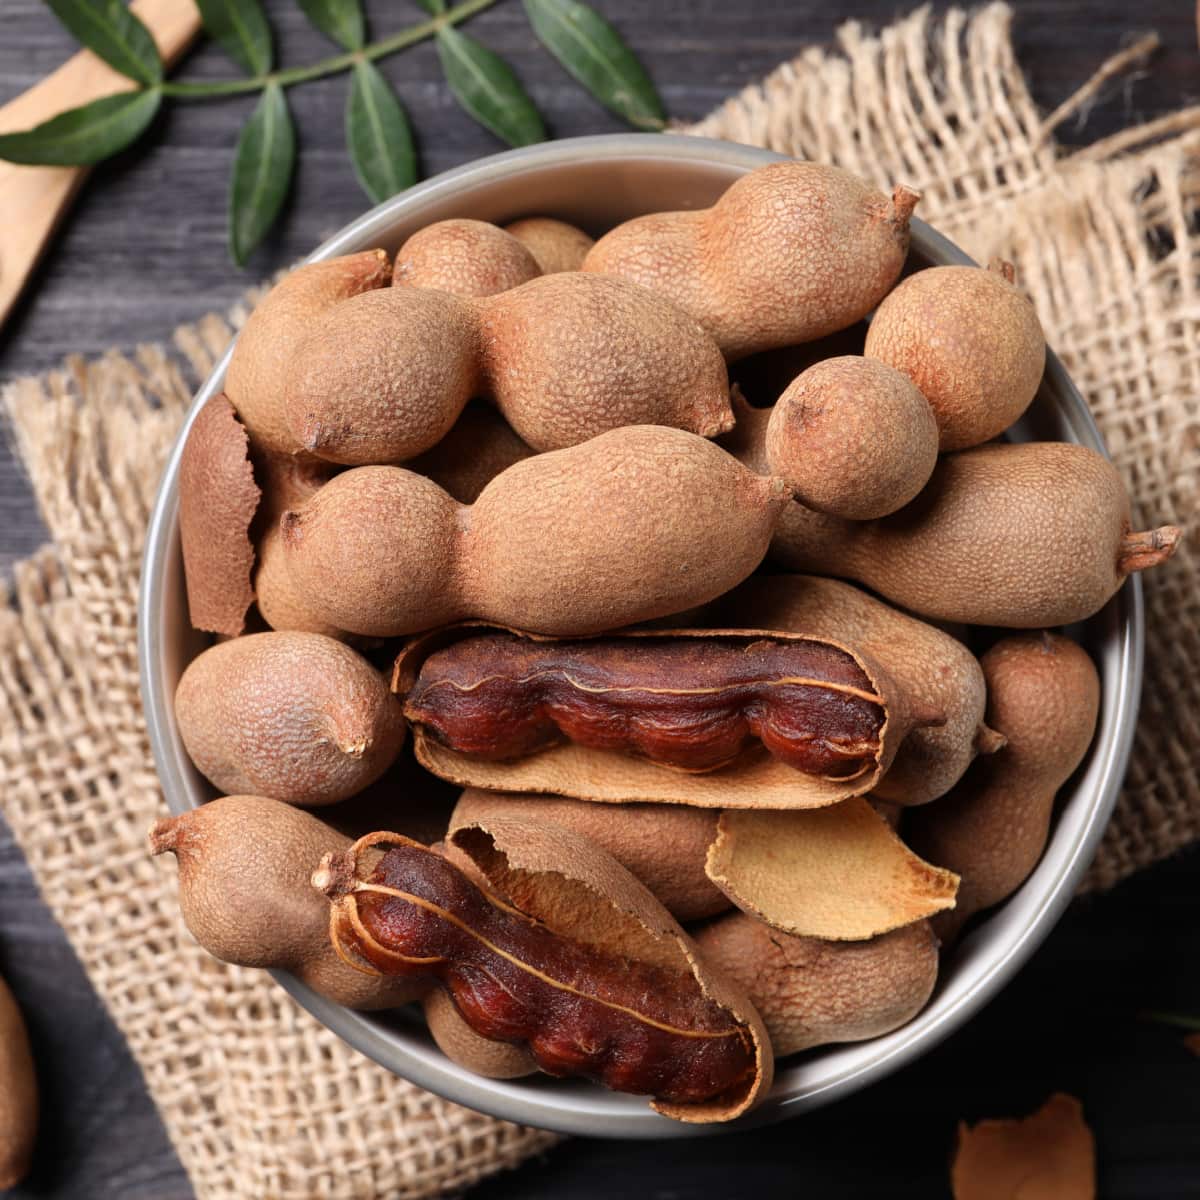 What Is Tamarind? (+ Uses & More) featuring A Bowl of Ripe Tamarinds on a Wooden Table